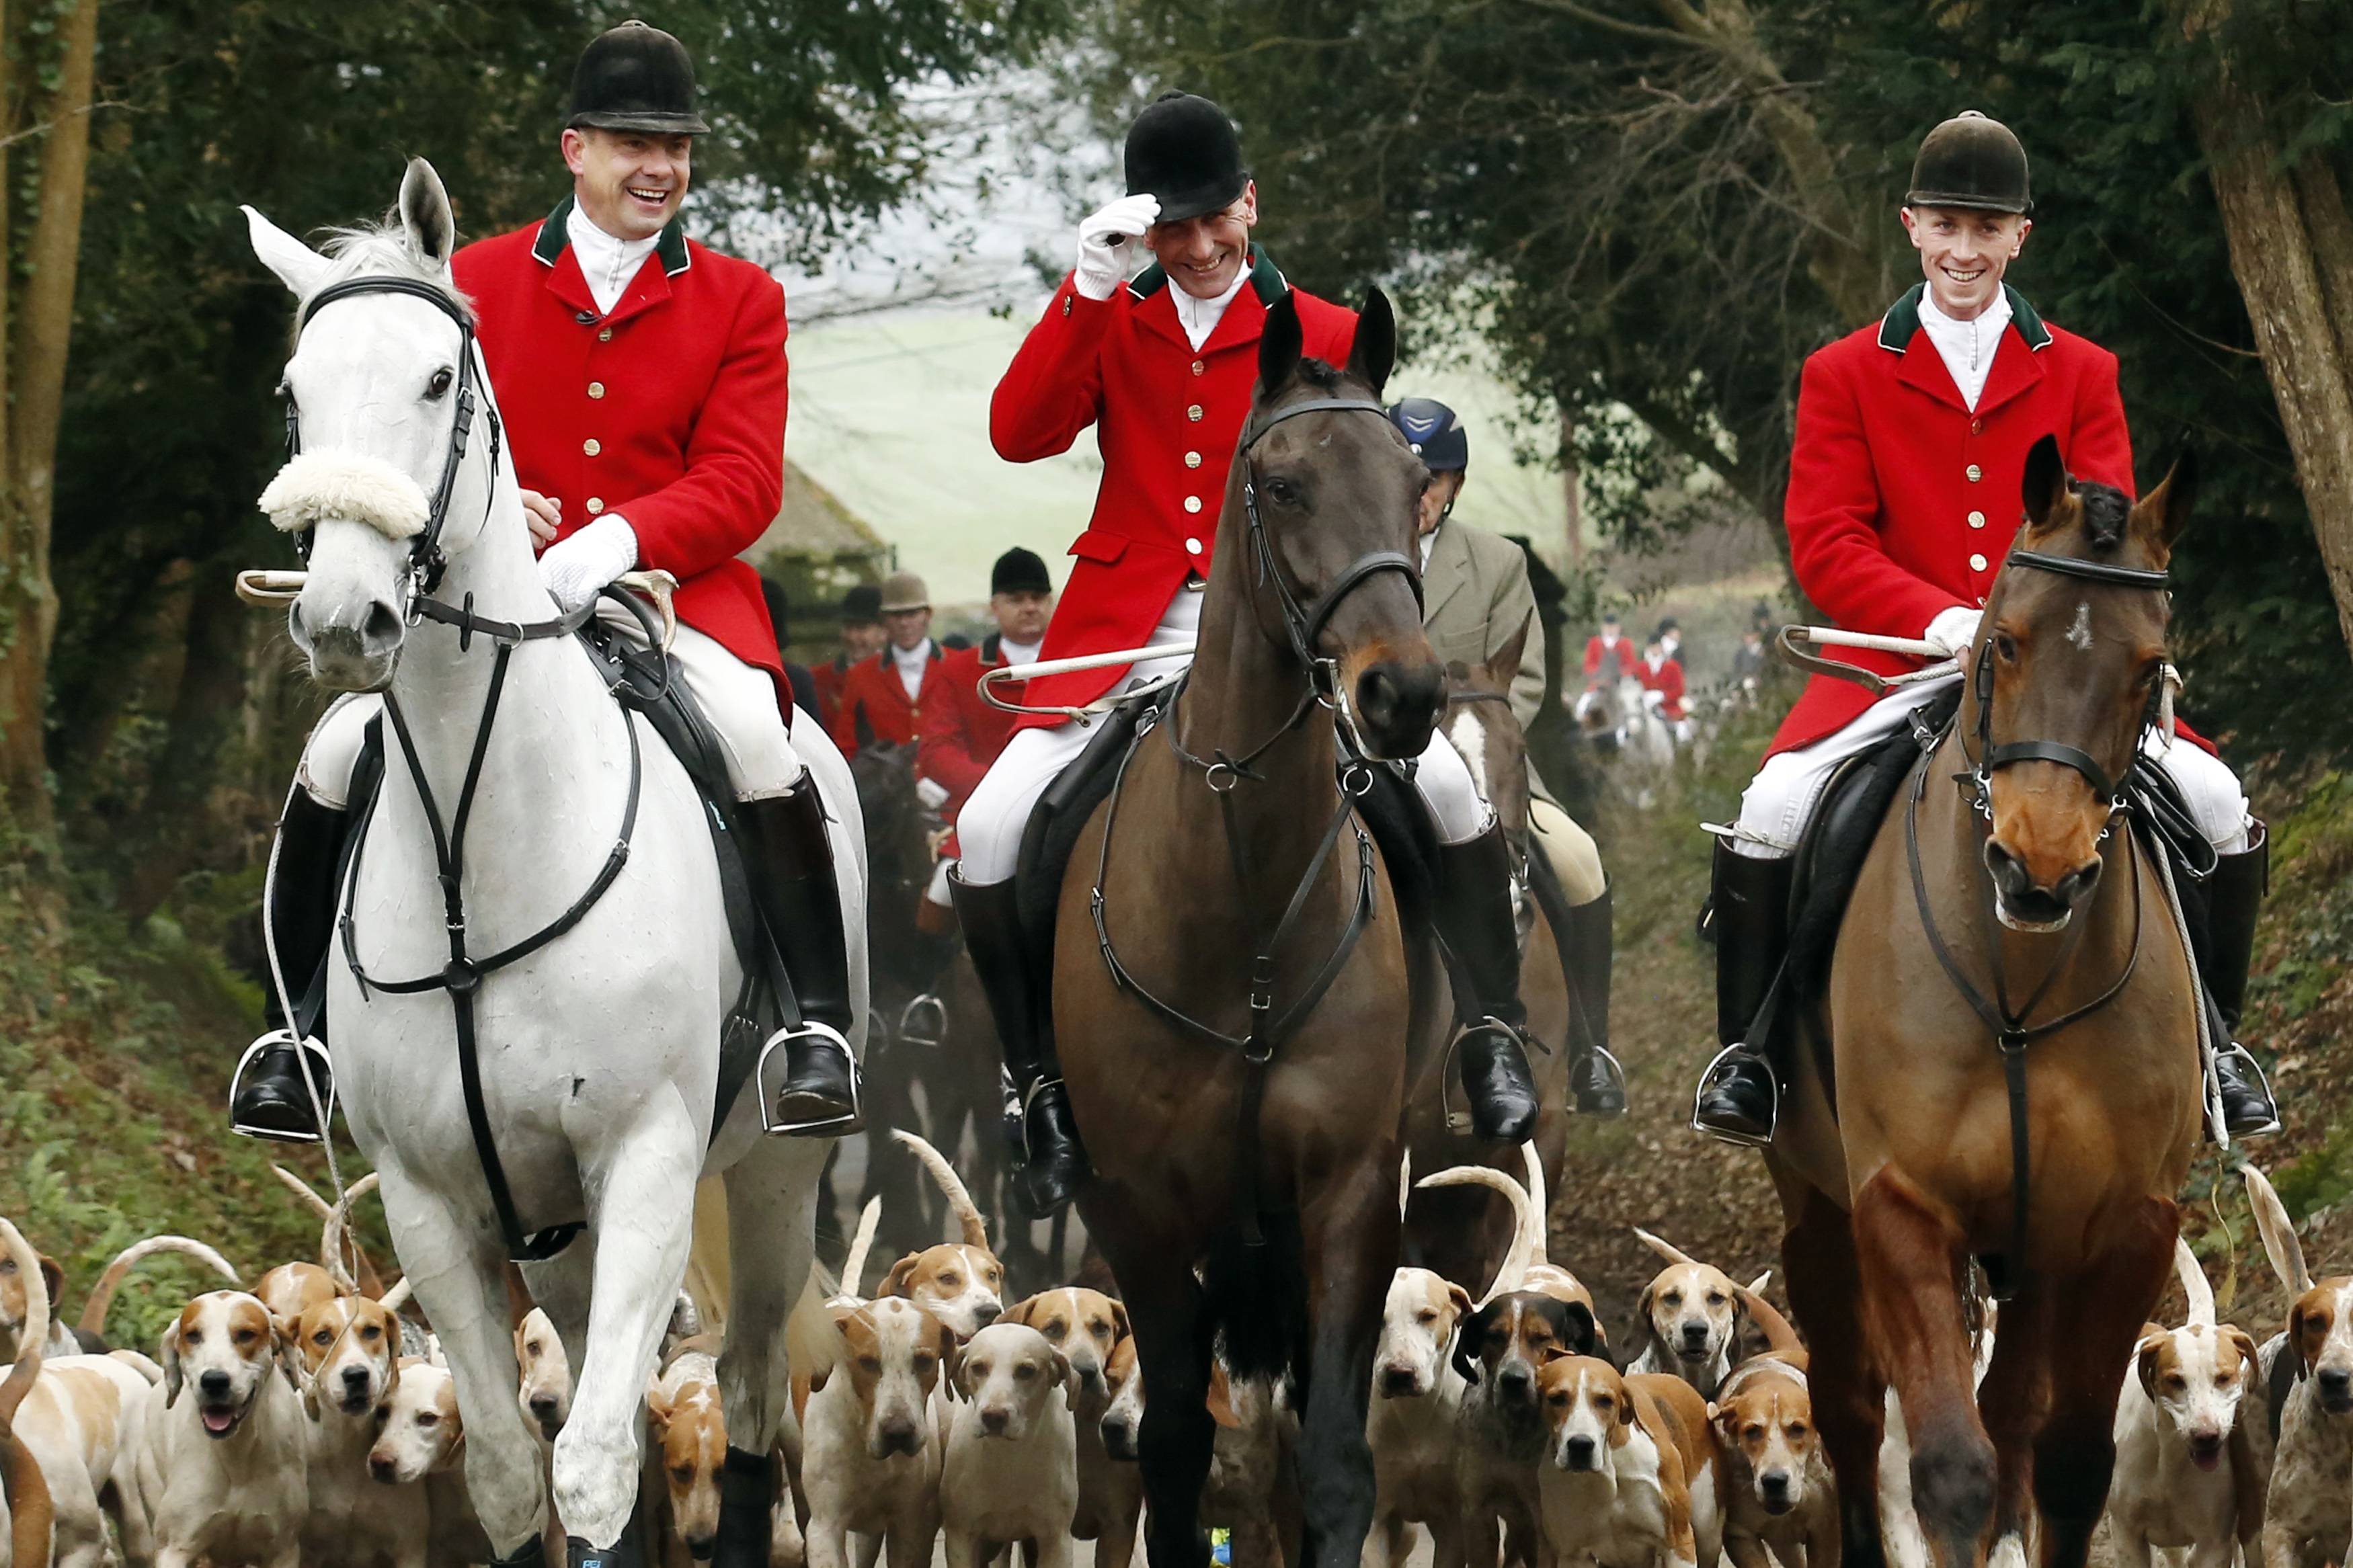 80% of Brits oppose fox hunting with hounds.